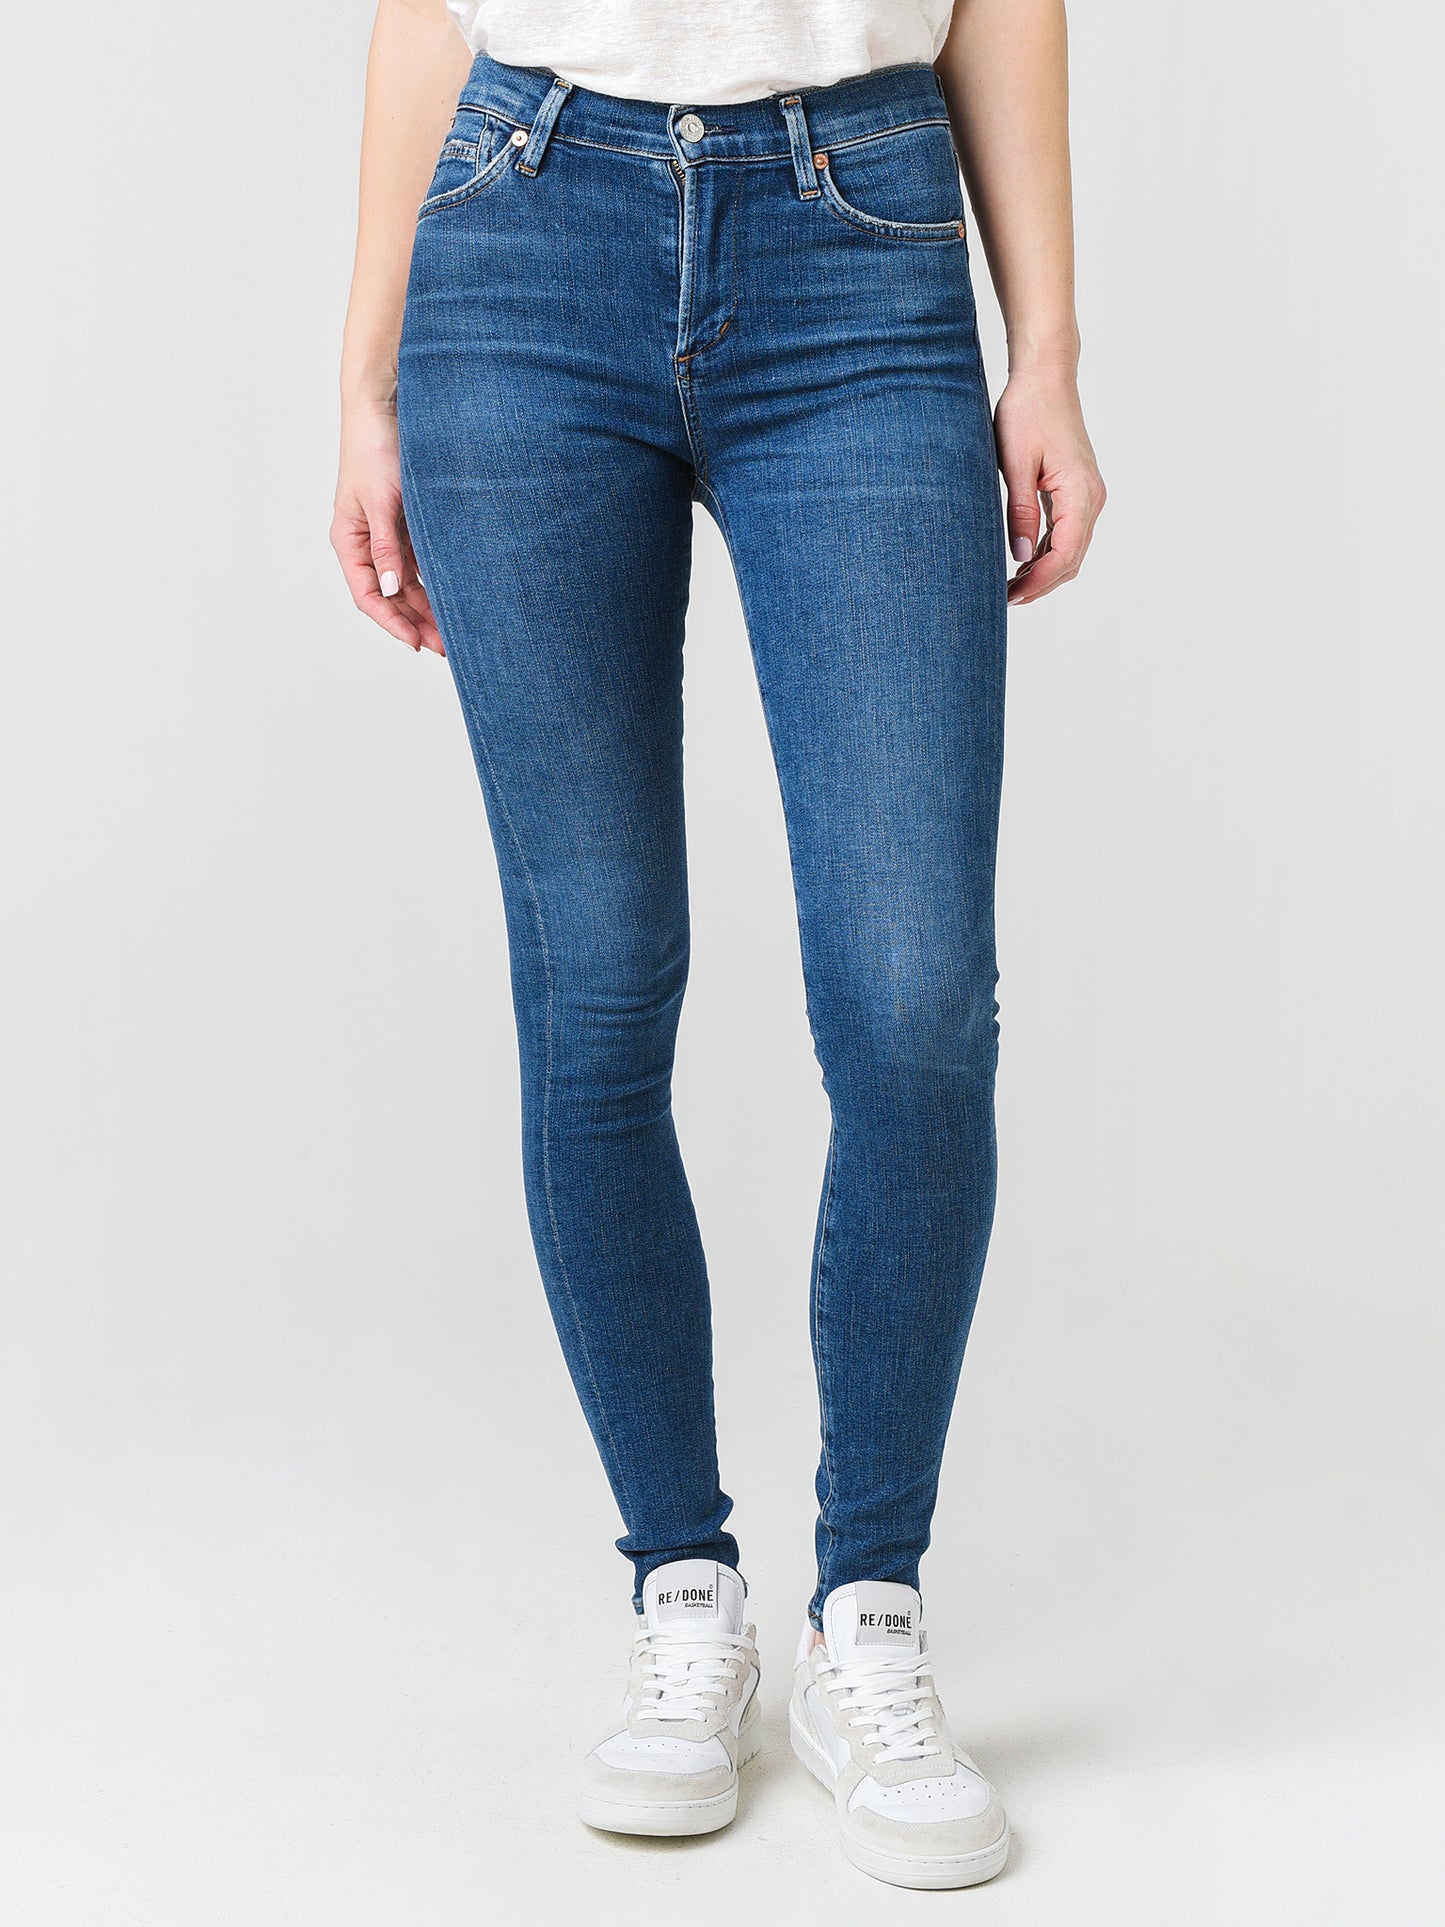 Citizens of Humanity Women's Rocket Mid Rise Skinny